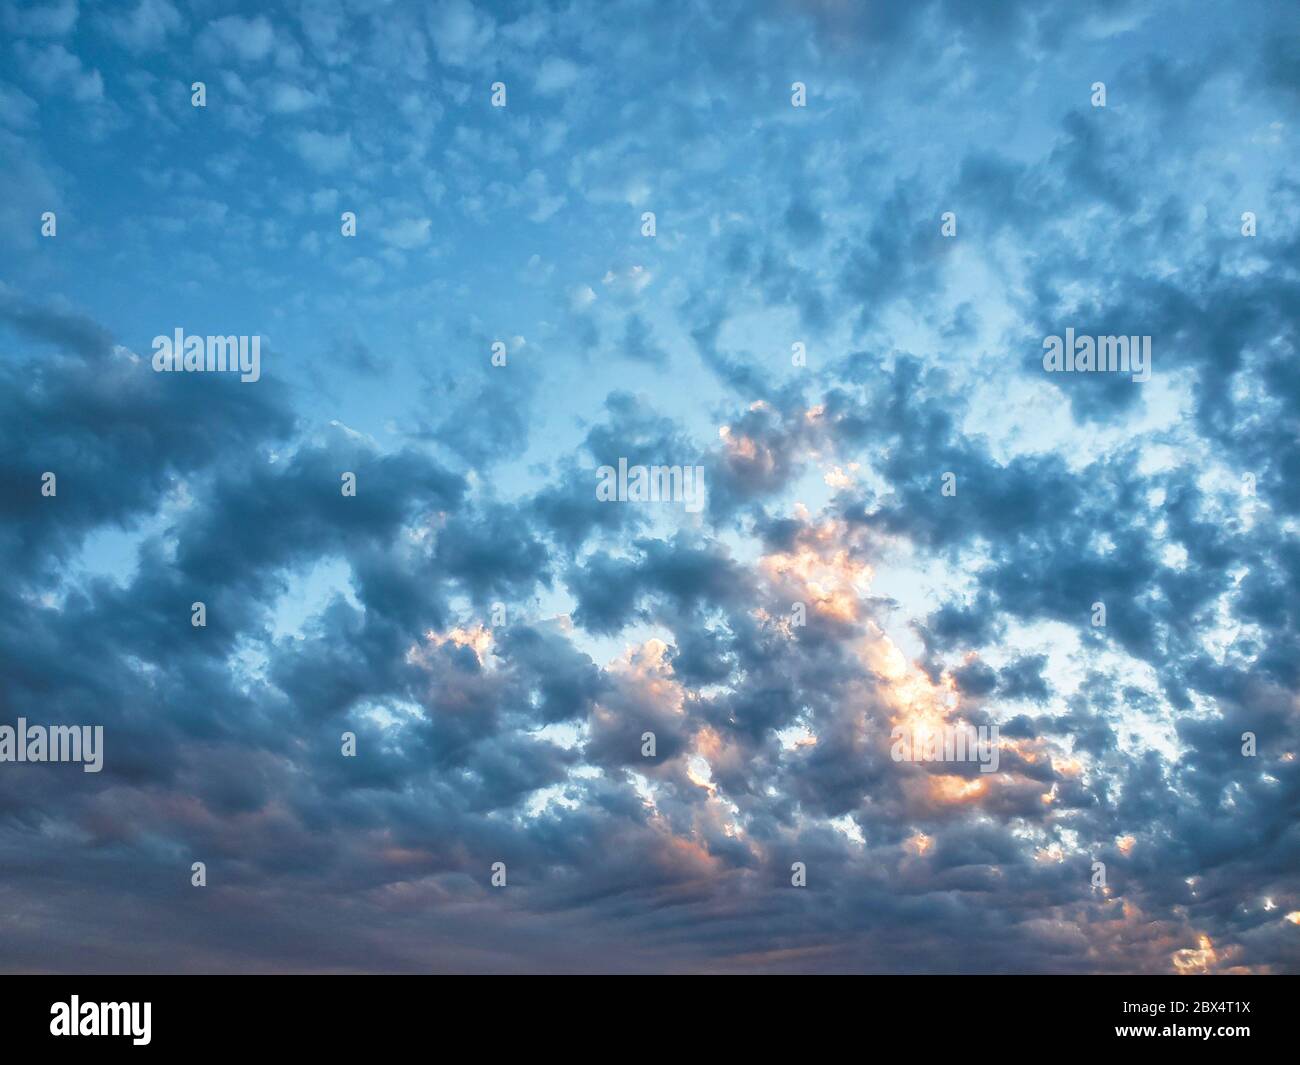 Impressive cloudy multicolored sunset sky field background,pattern wallpaper Stock Photo